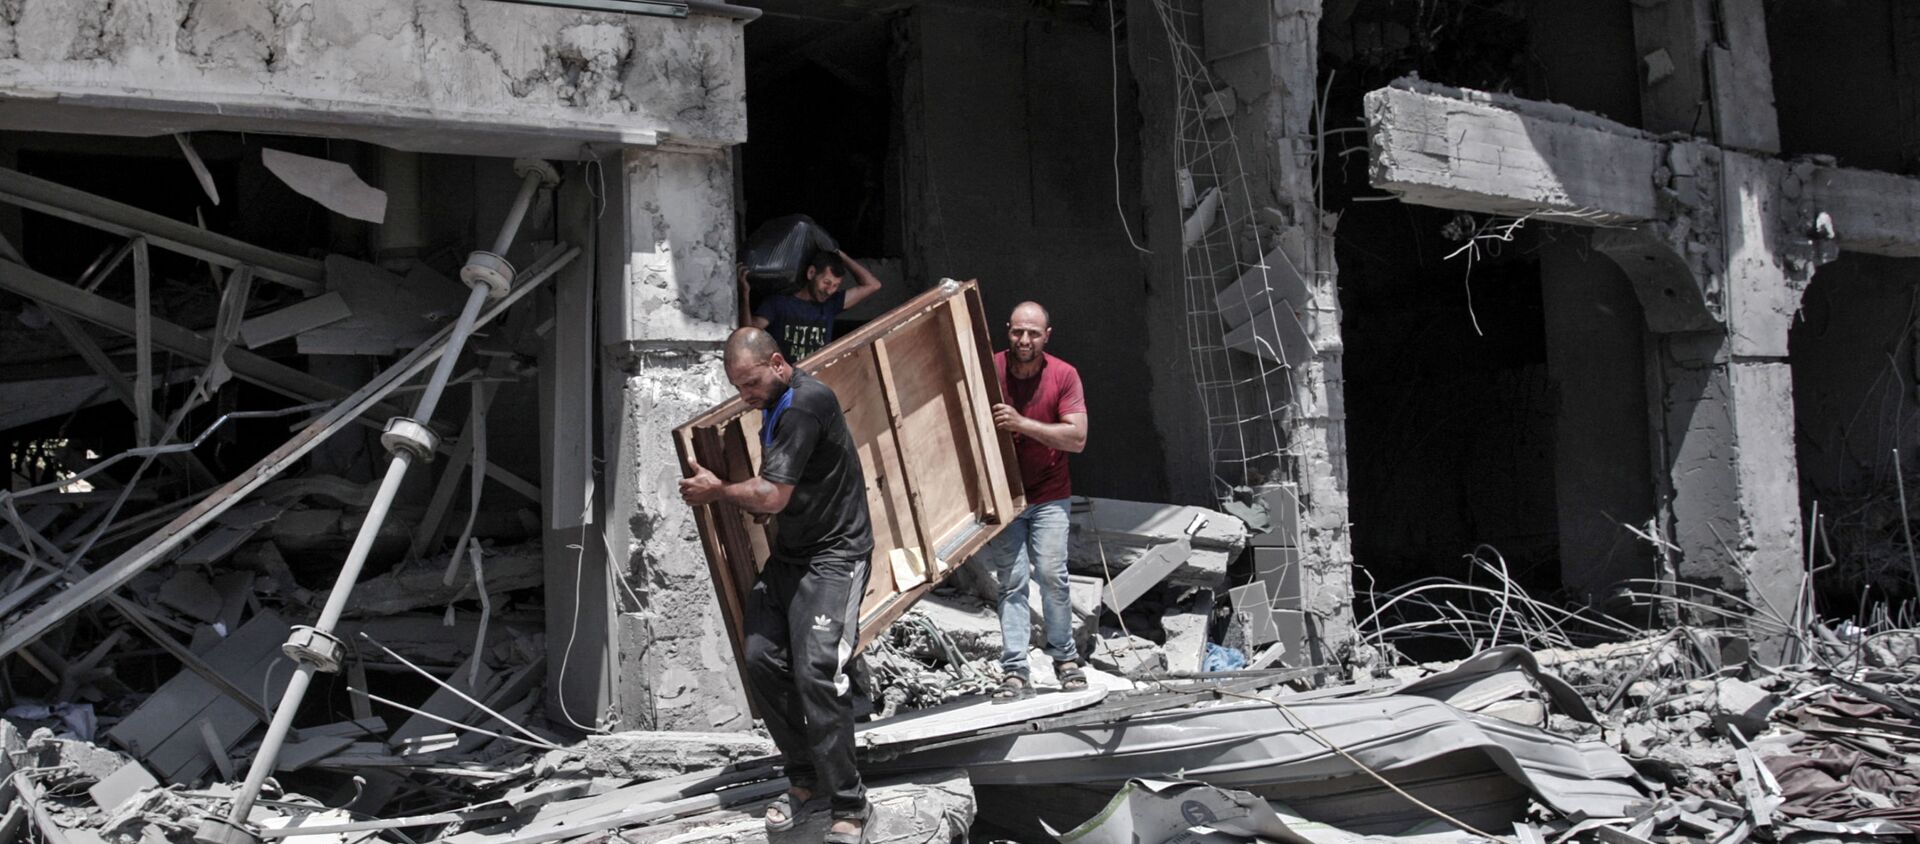 Palestinian men remove salvageable items from the bombarded Al-Jawhara Tower in Gaza City on May 17, 2021, five days after it was targeted by Israeli airstrikes. - Sputnik International, 1920